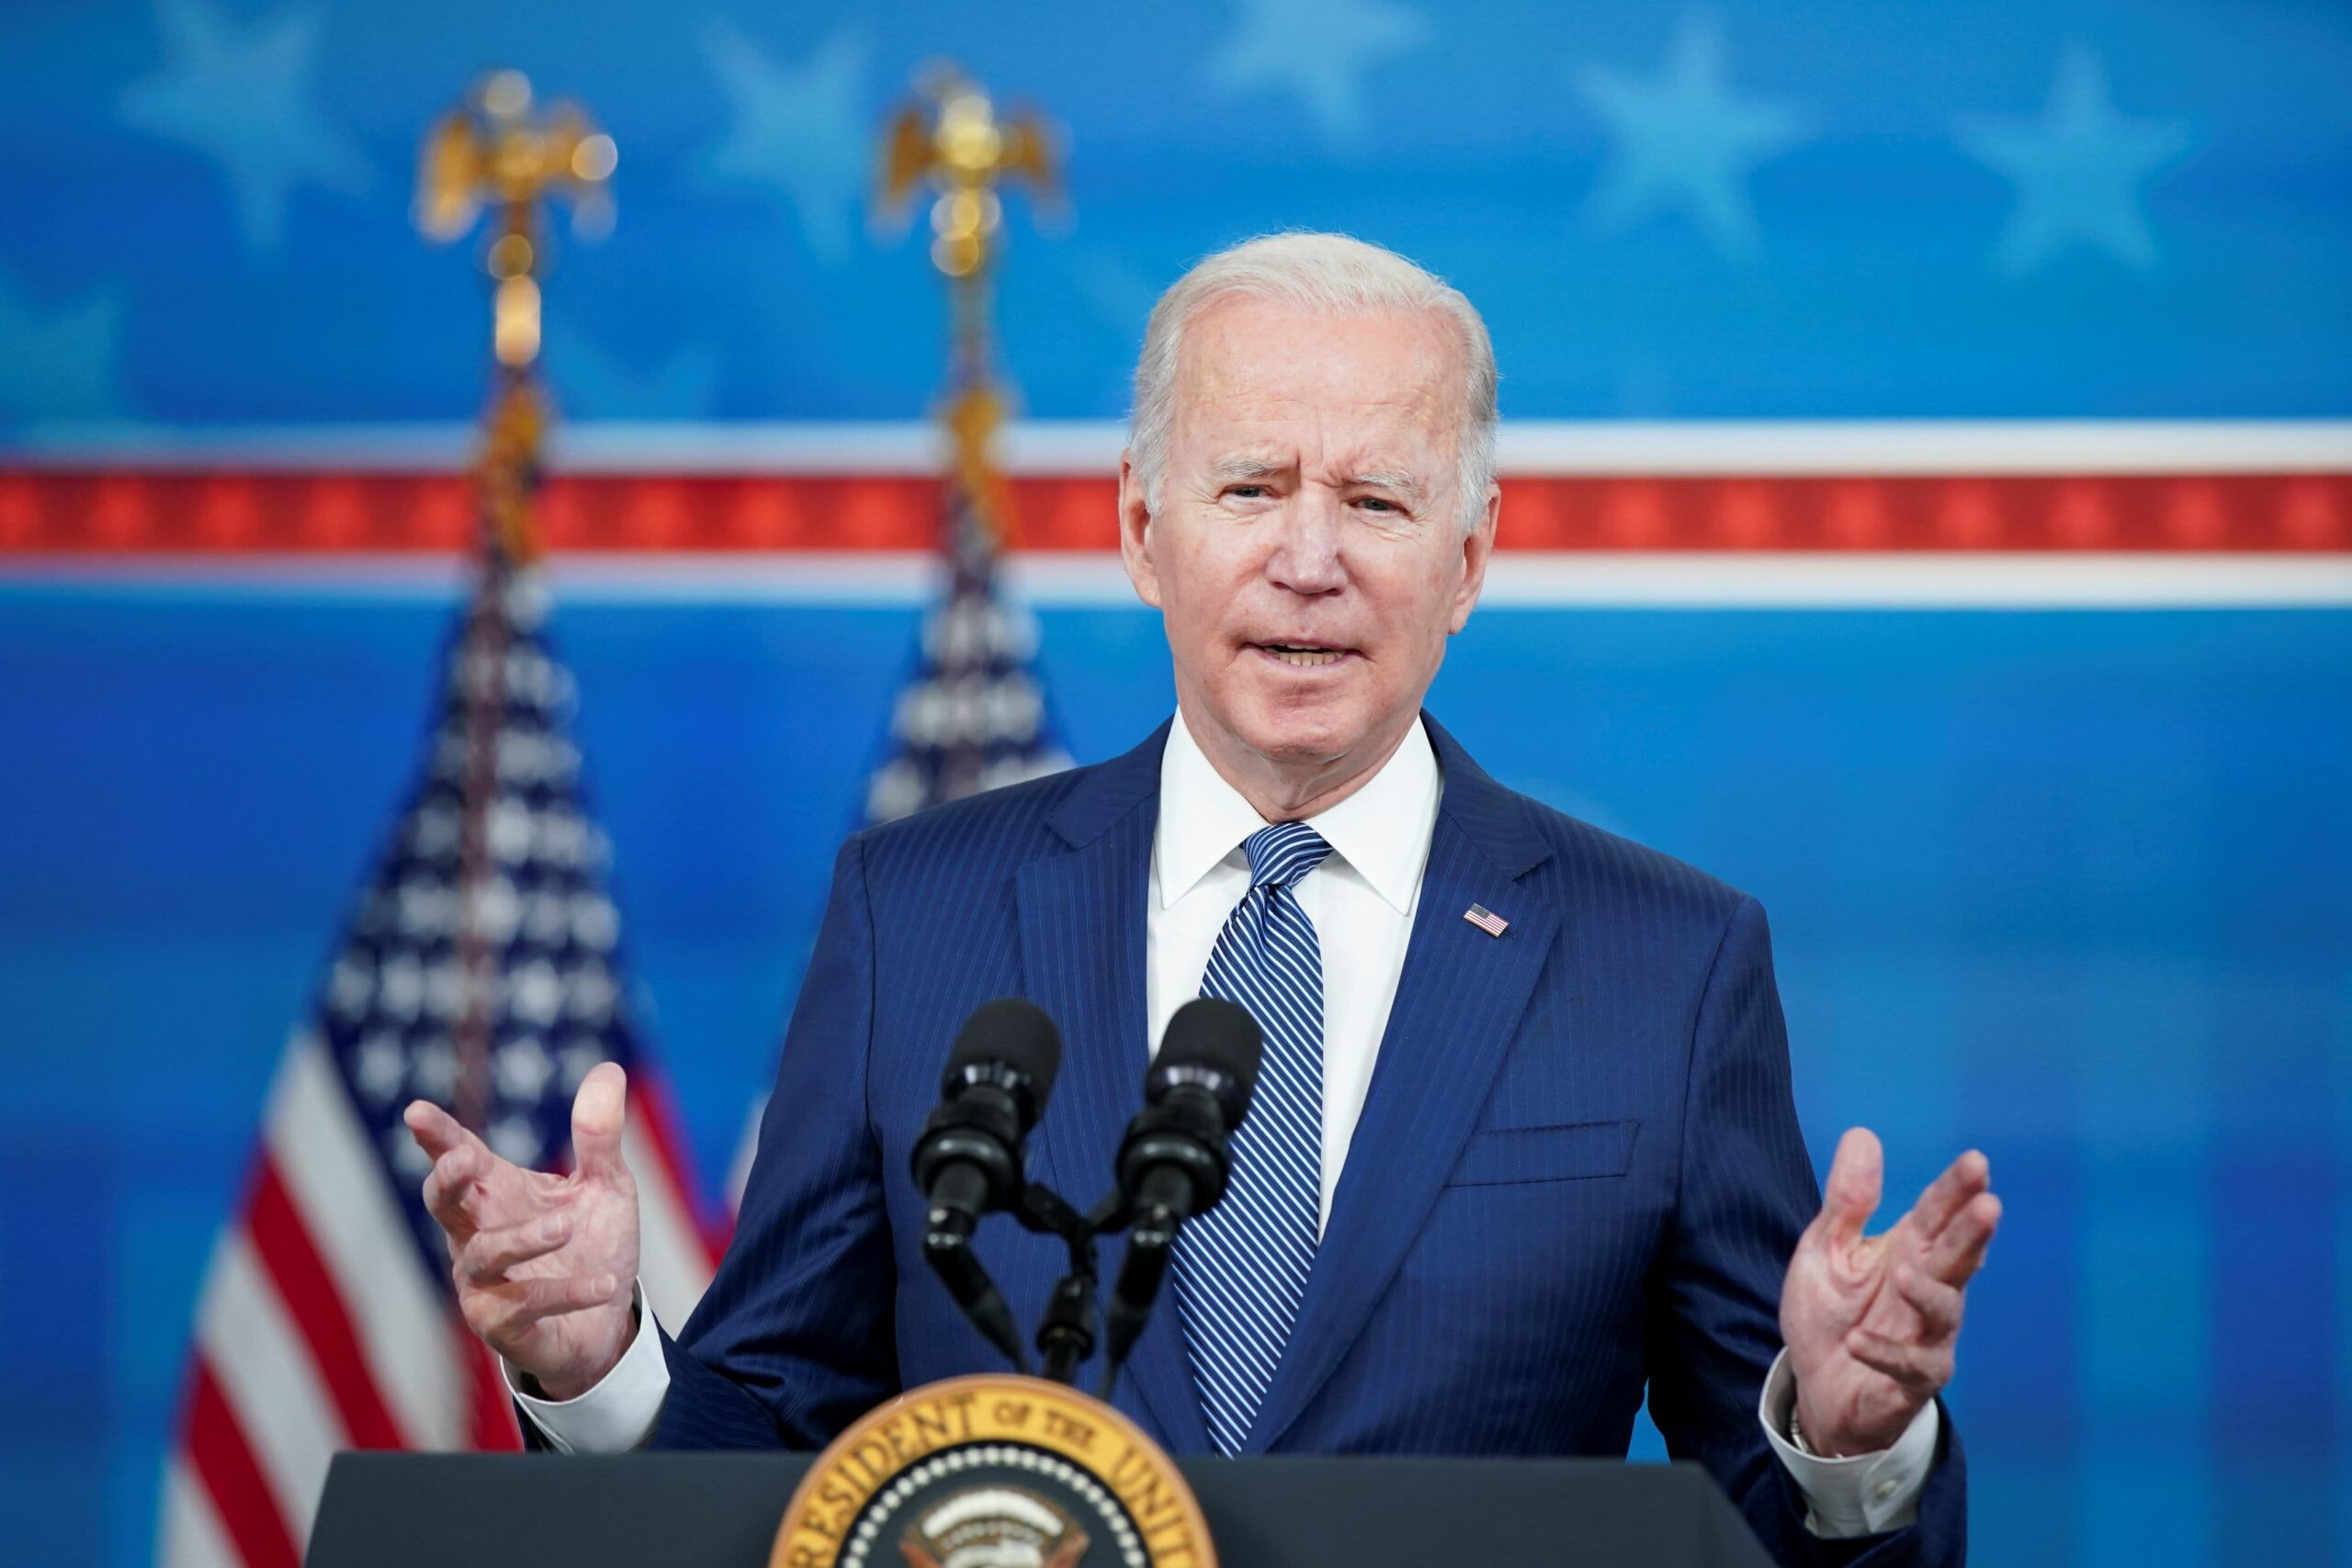 Biden asks businesses to proceed with vaccine mandate after omicron variant arrives in U.S.